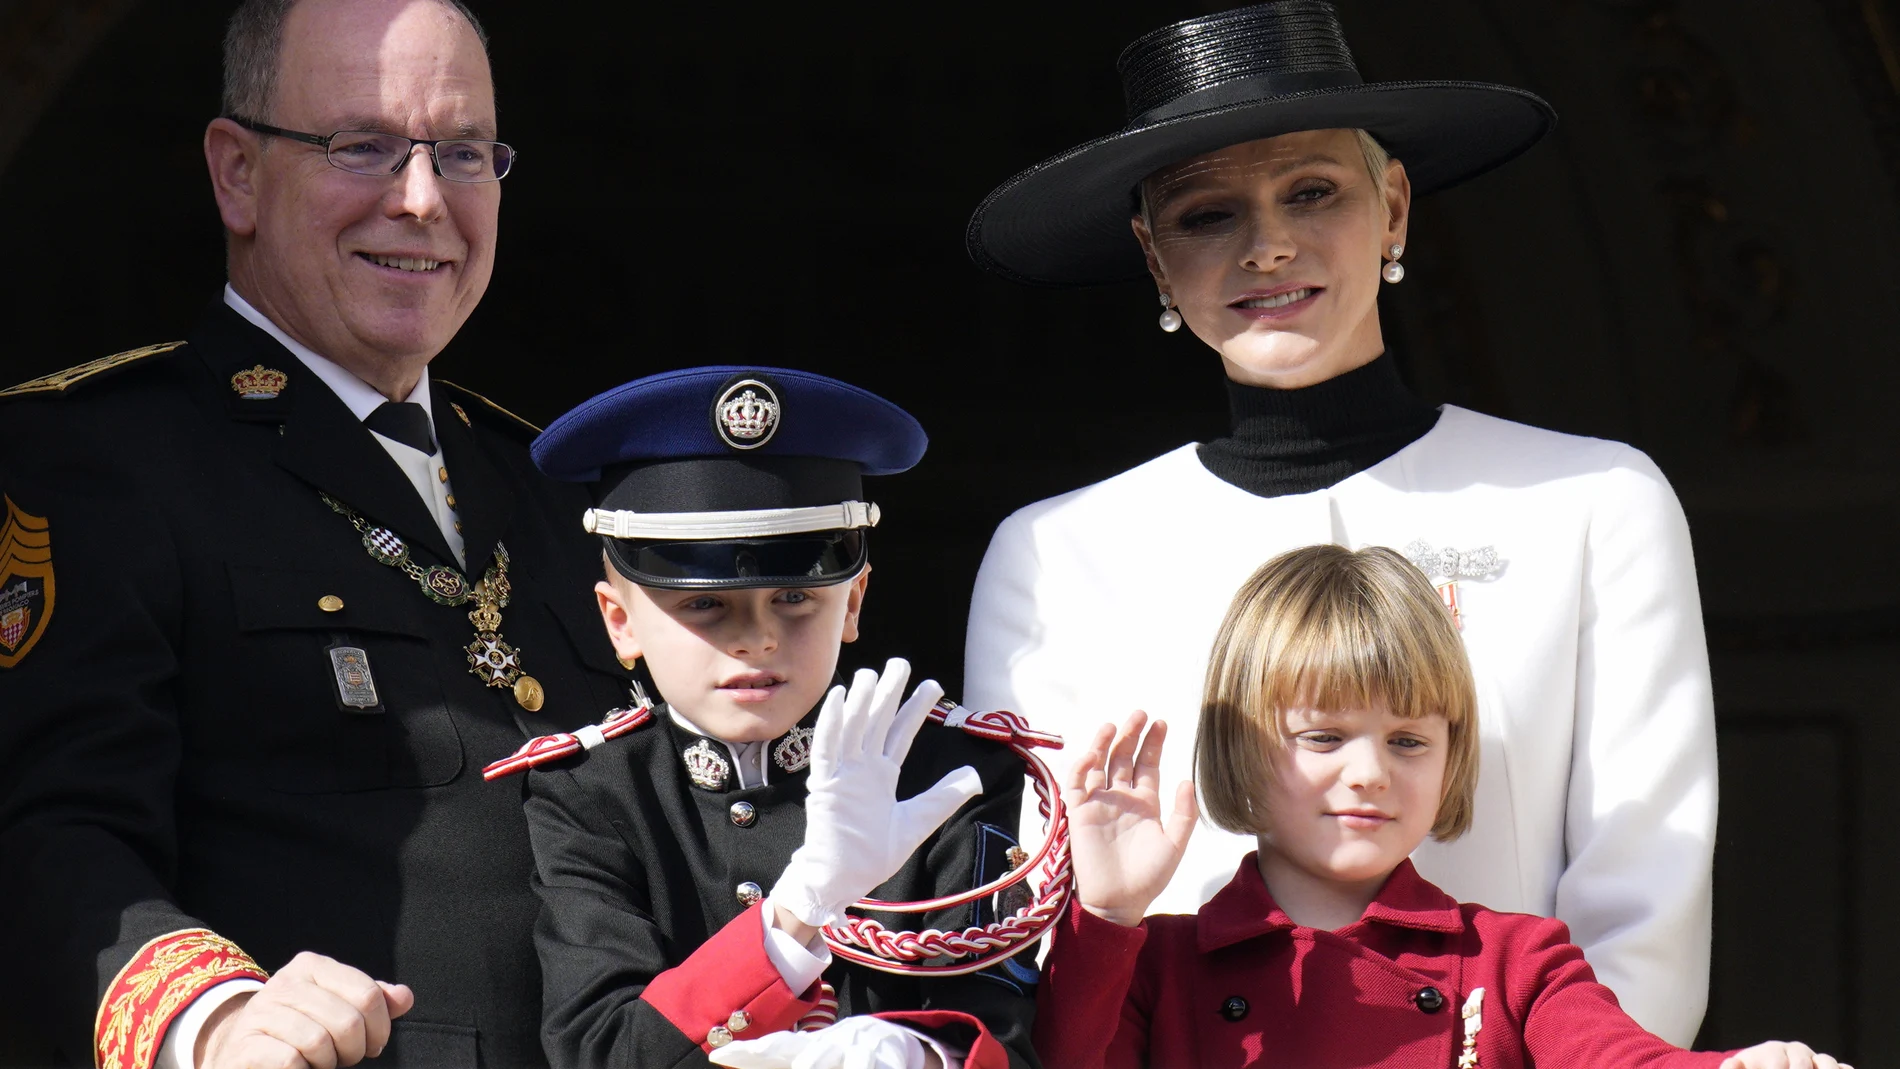 Prince Albert II of Monaco and Princess Charlene, right, stand with their children Prince Jacques and Princess Gabriella from the balcony of the Monaco Palace during ceremonies marking National Day, in Monaco.